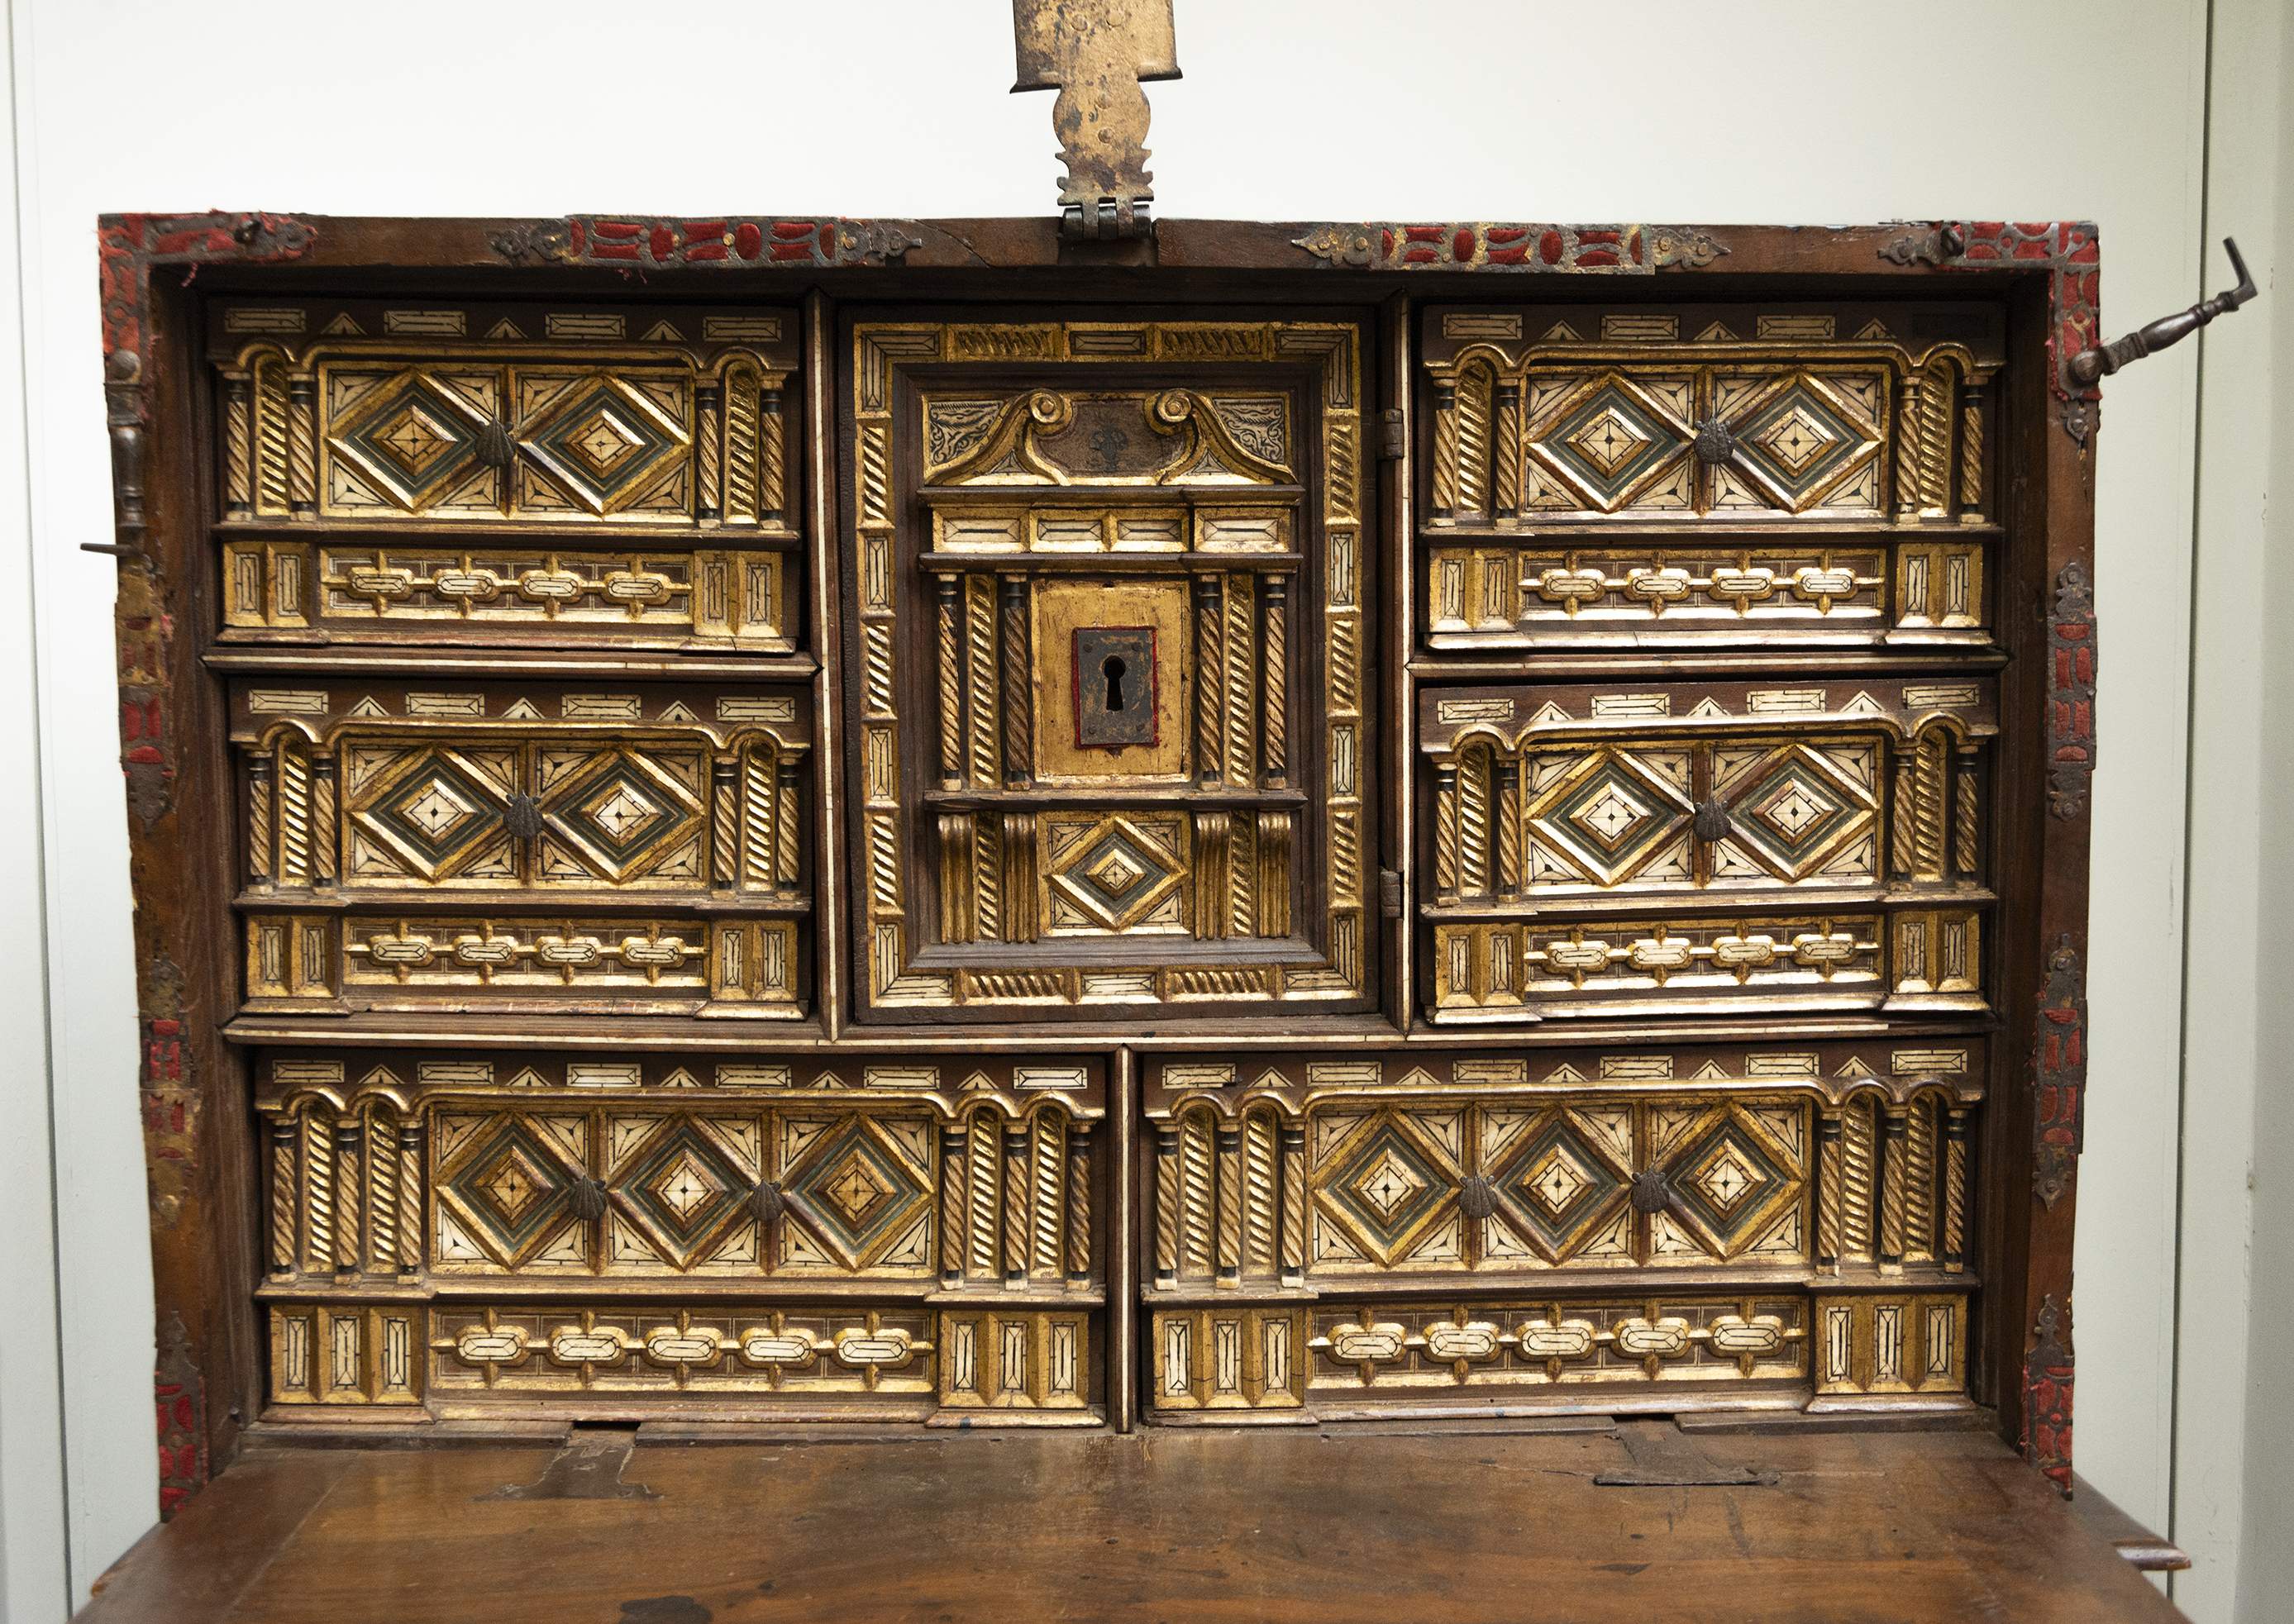 Renaissance Vargas "Bargueño" type chest cabinet with period table, 16th century - Image 3 of 8